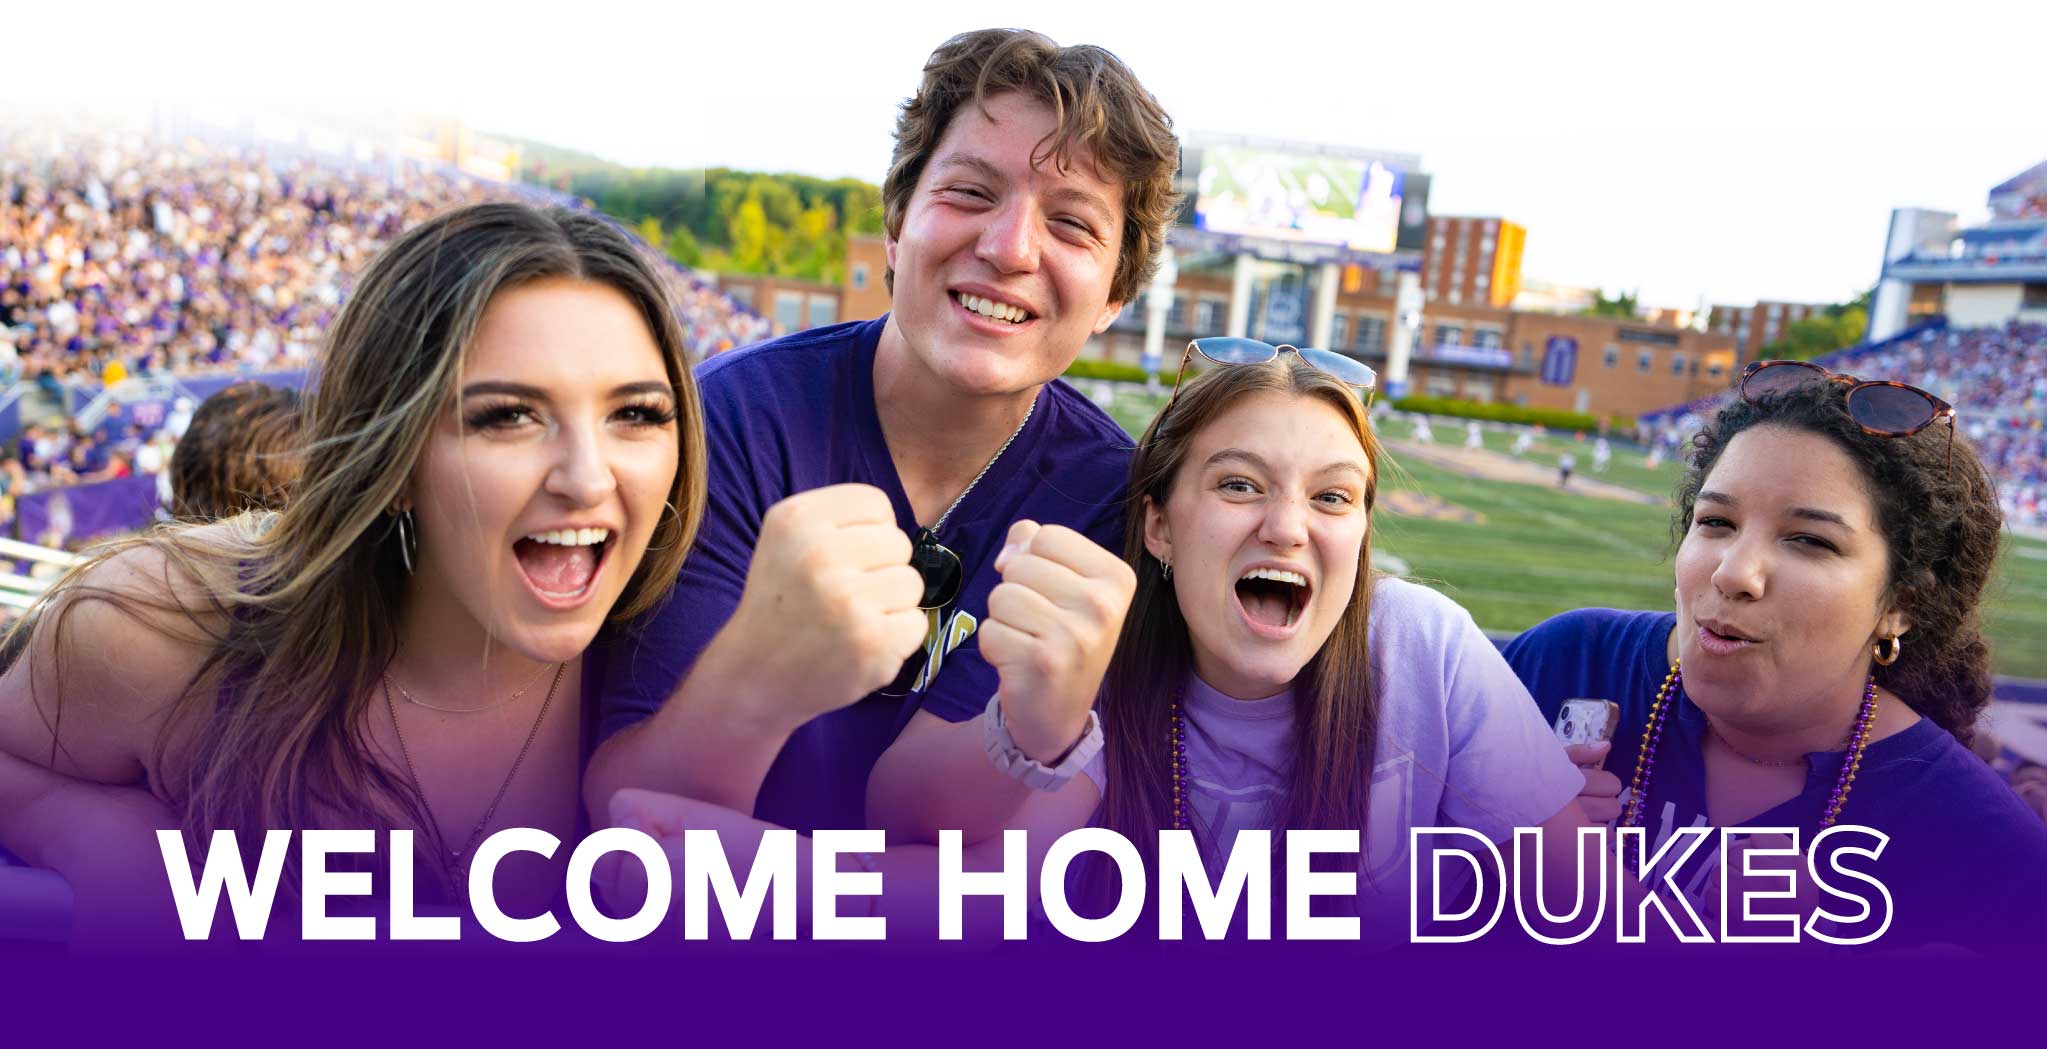 VIDEO: Welcome home, Dukes!